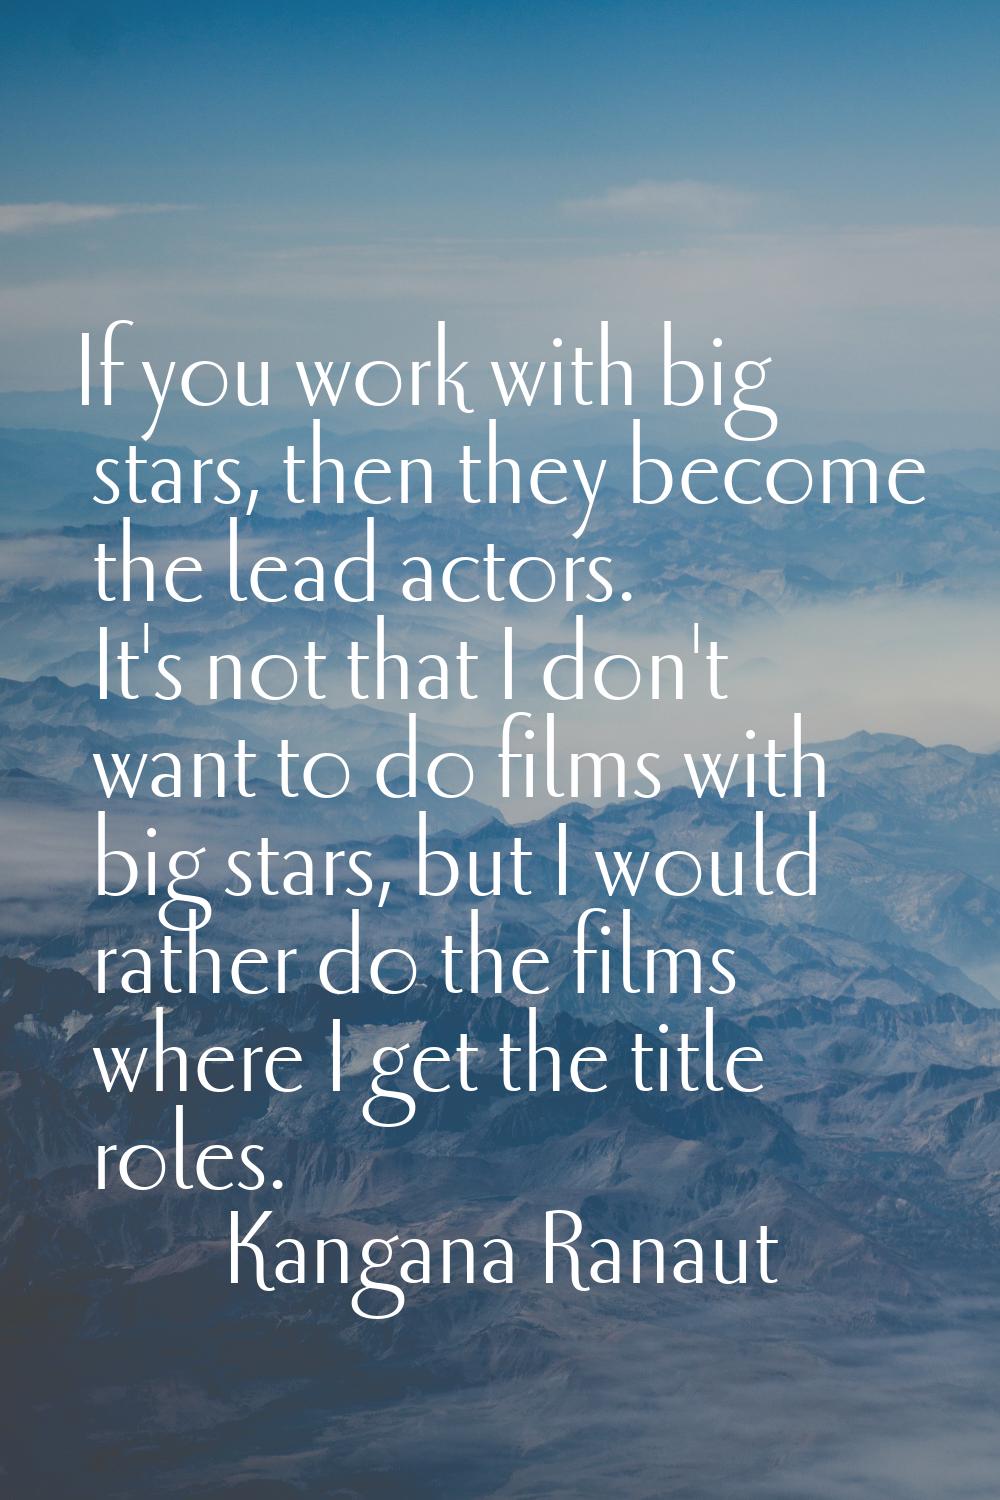 If you work with big stars, then they become the lead actors. It's not that I don't want to do film